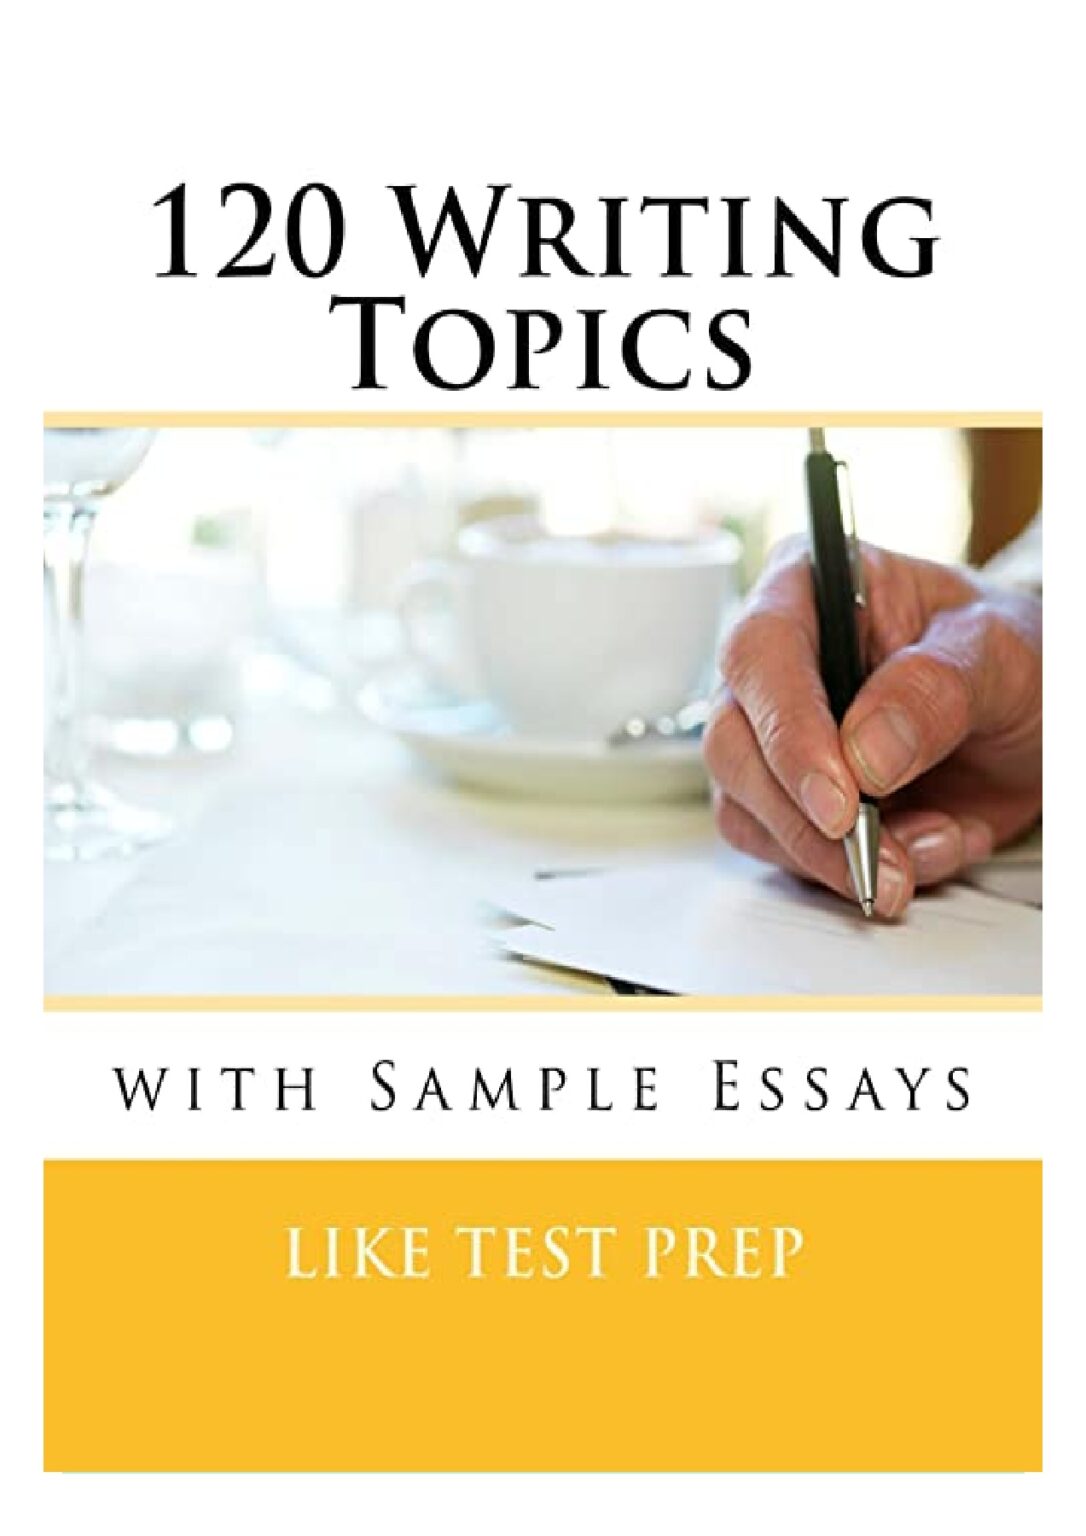 tcs essay writing topics with answers